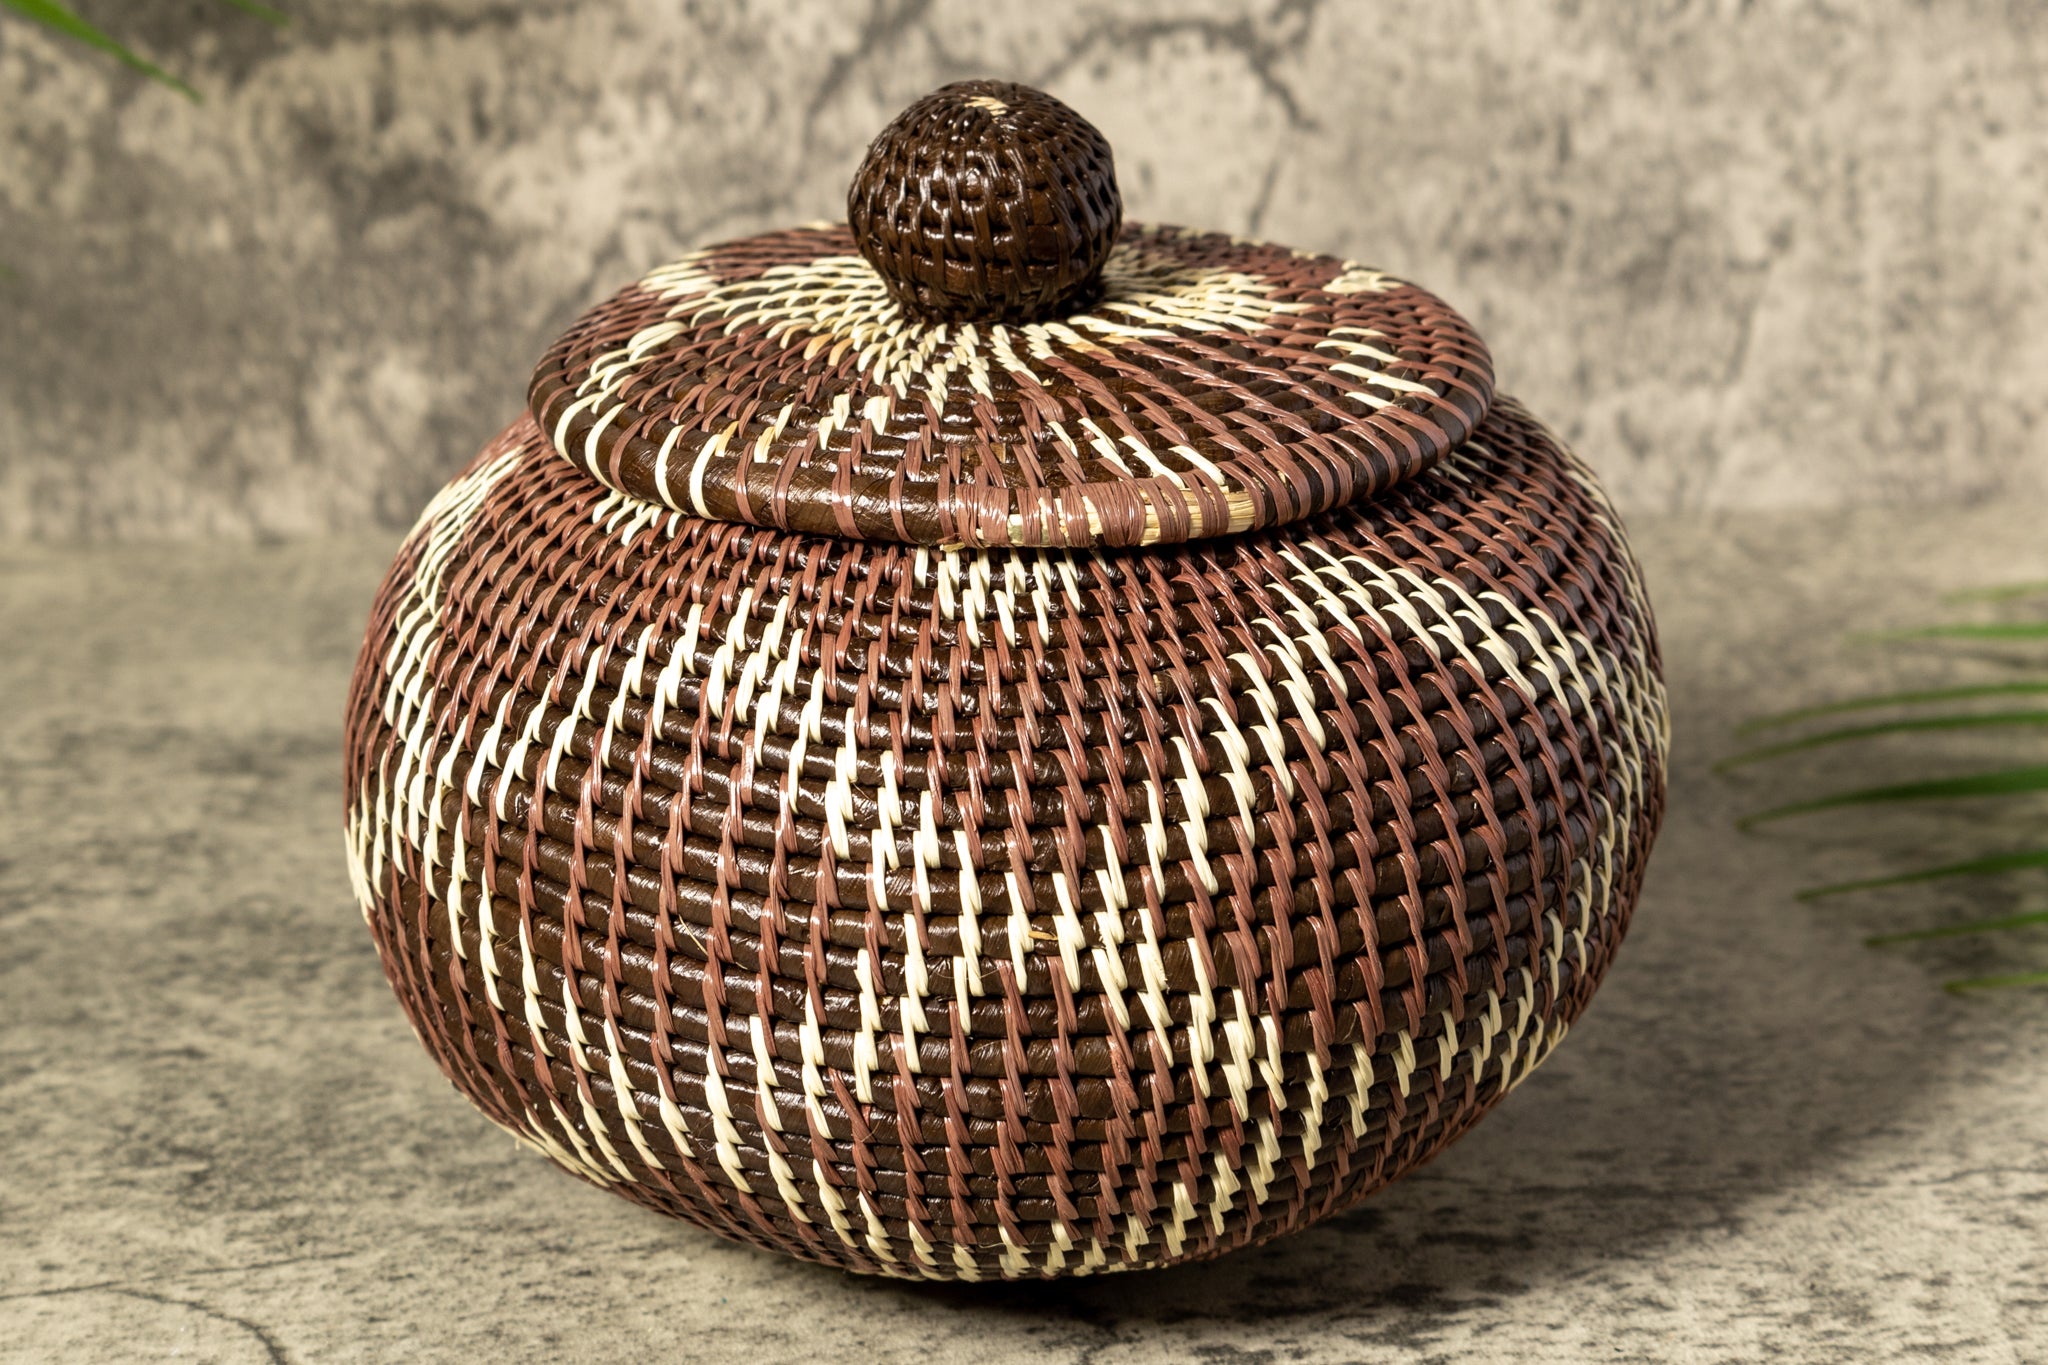 Brown Fish Net Woven Basket With Top